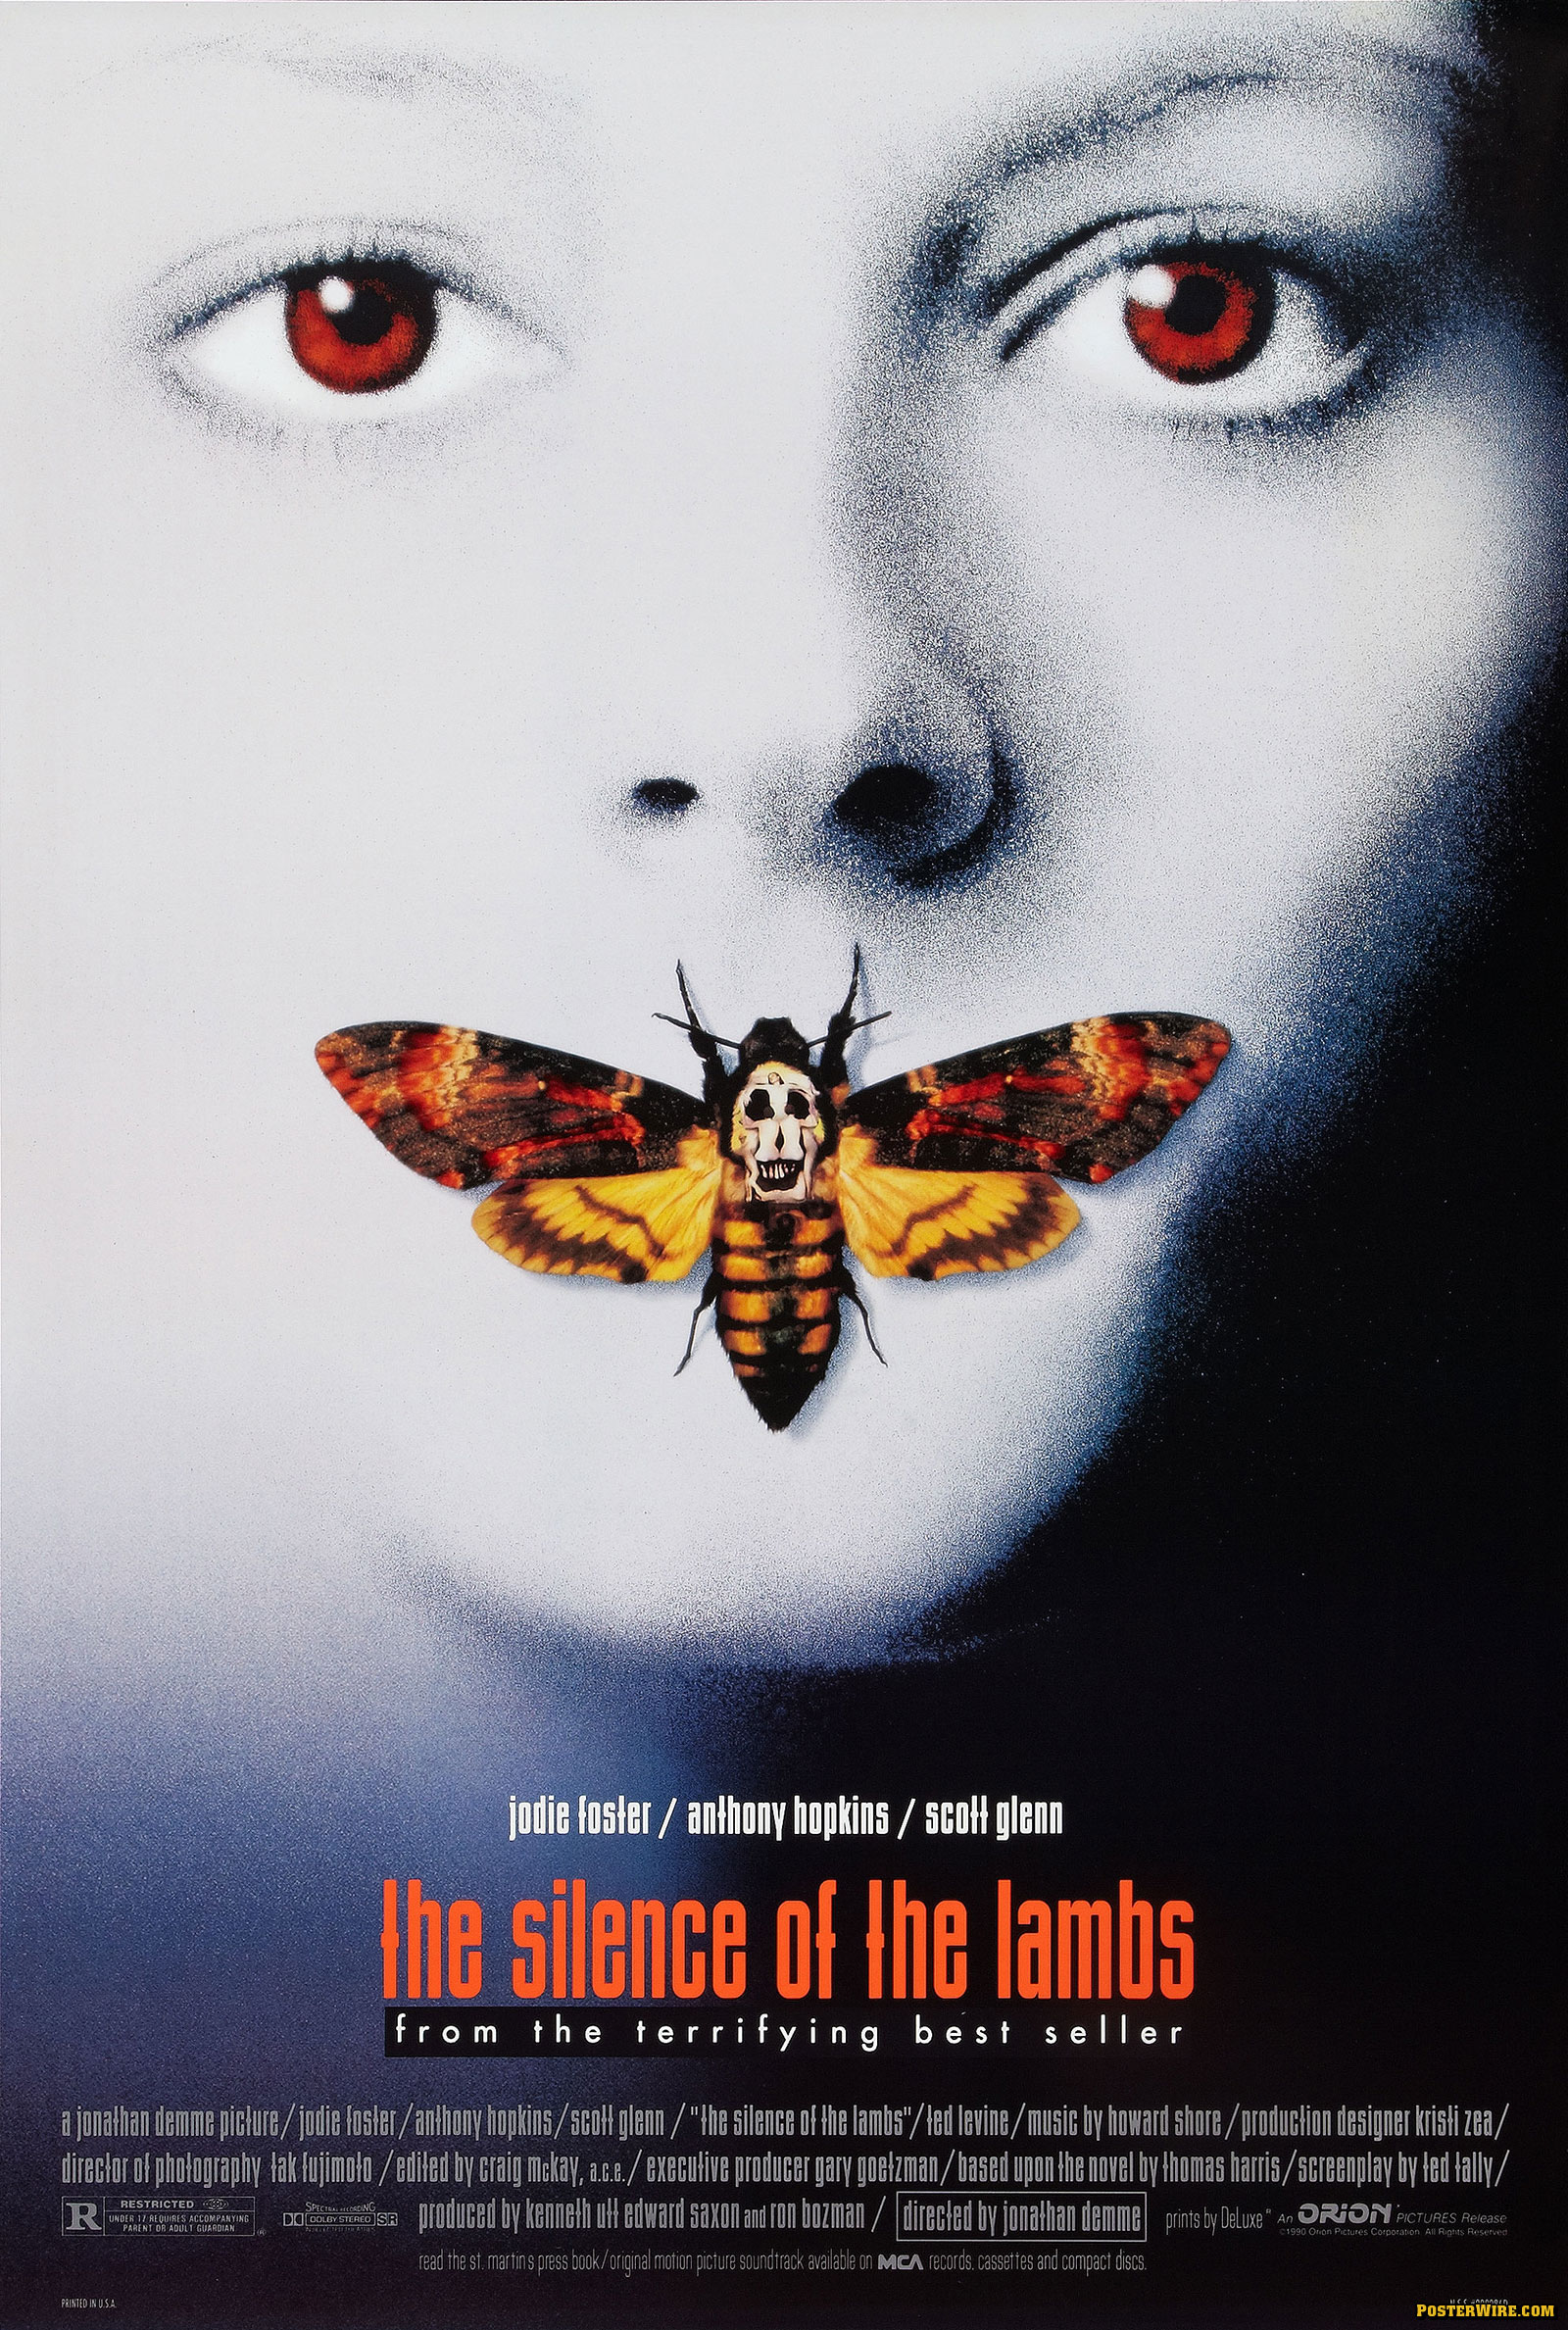 http://posterwire.com/wp-content/uploads/silence_of_the_lambs.jpg